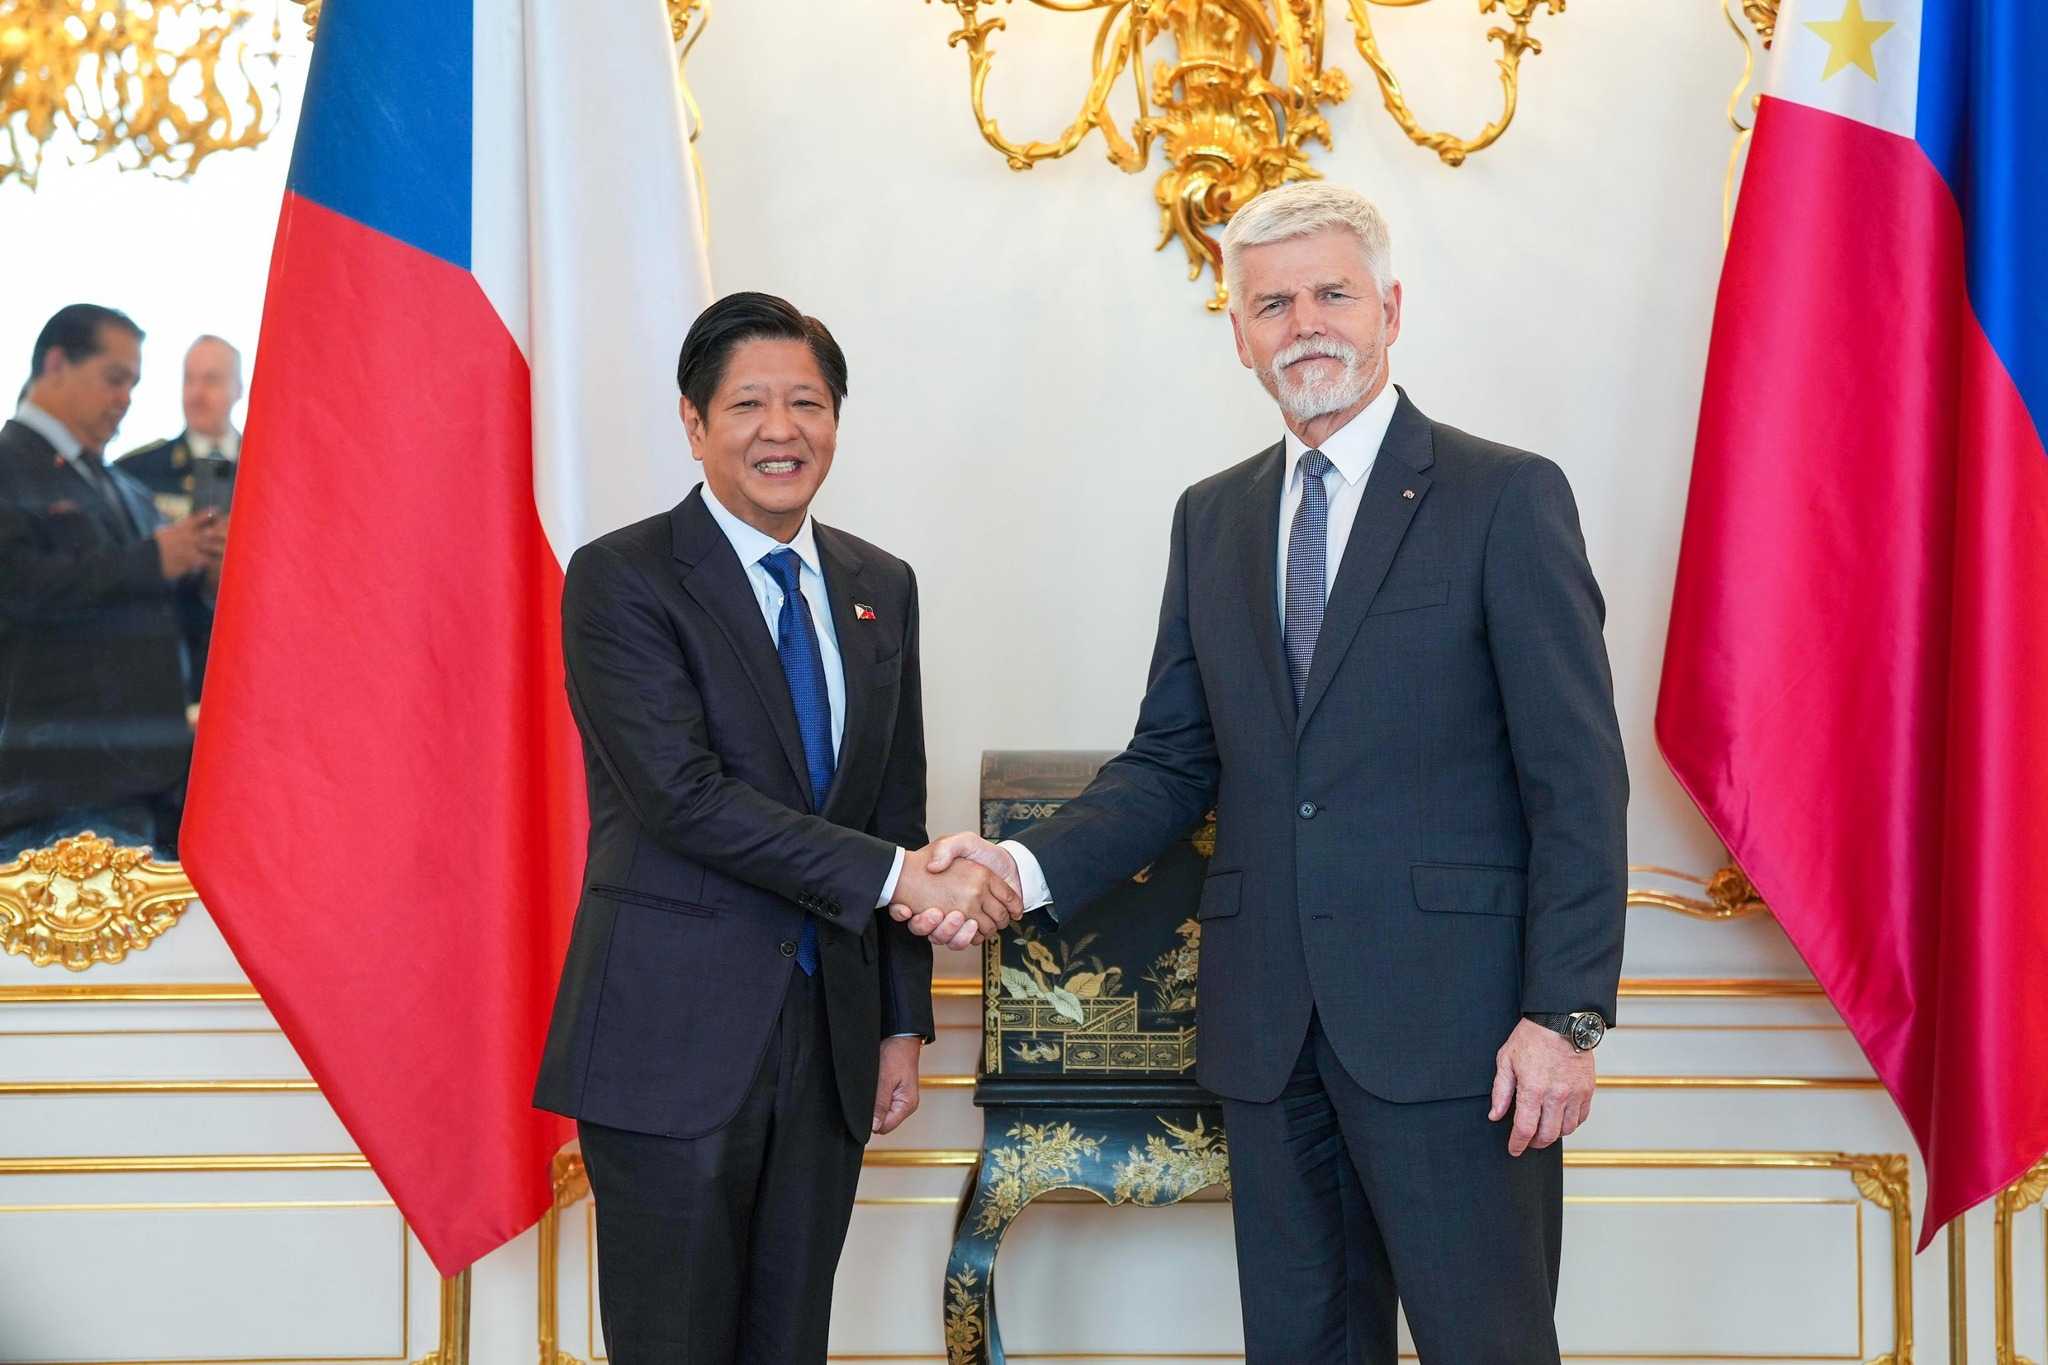 Czech Republic backs PH on issues at South China Sea